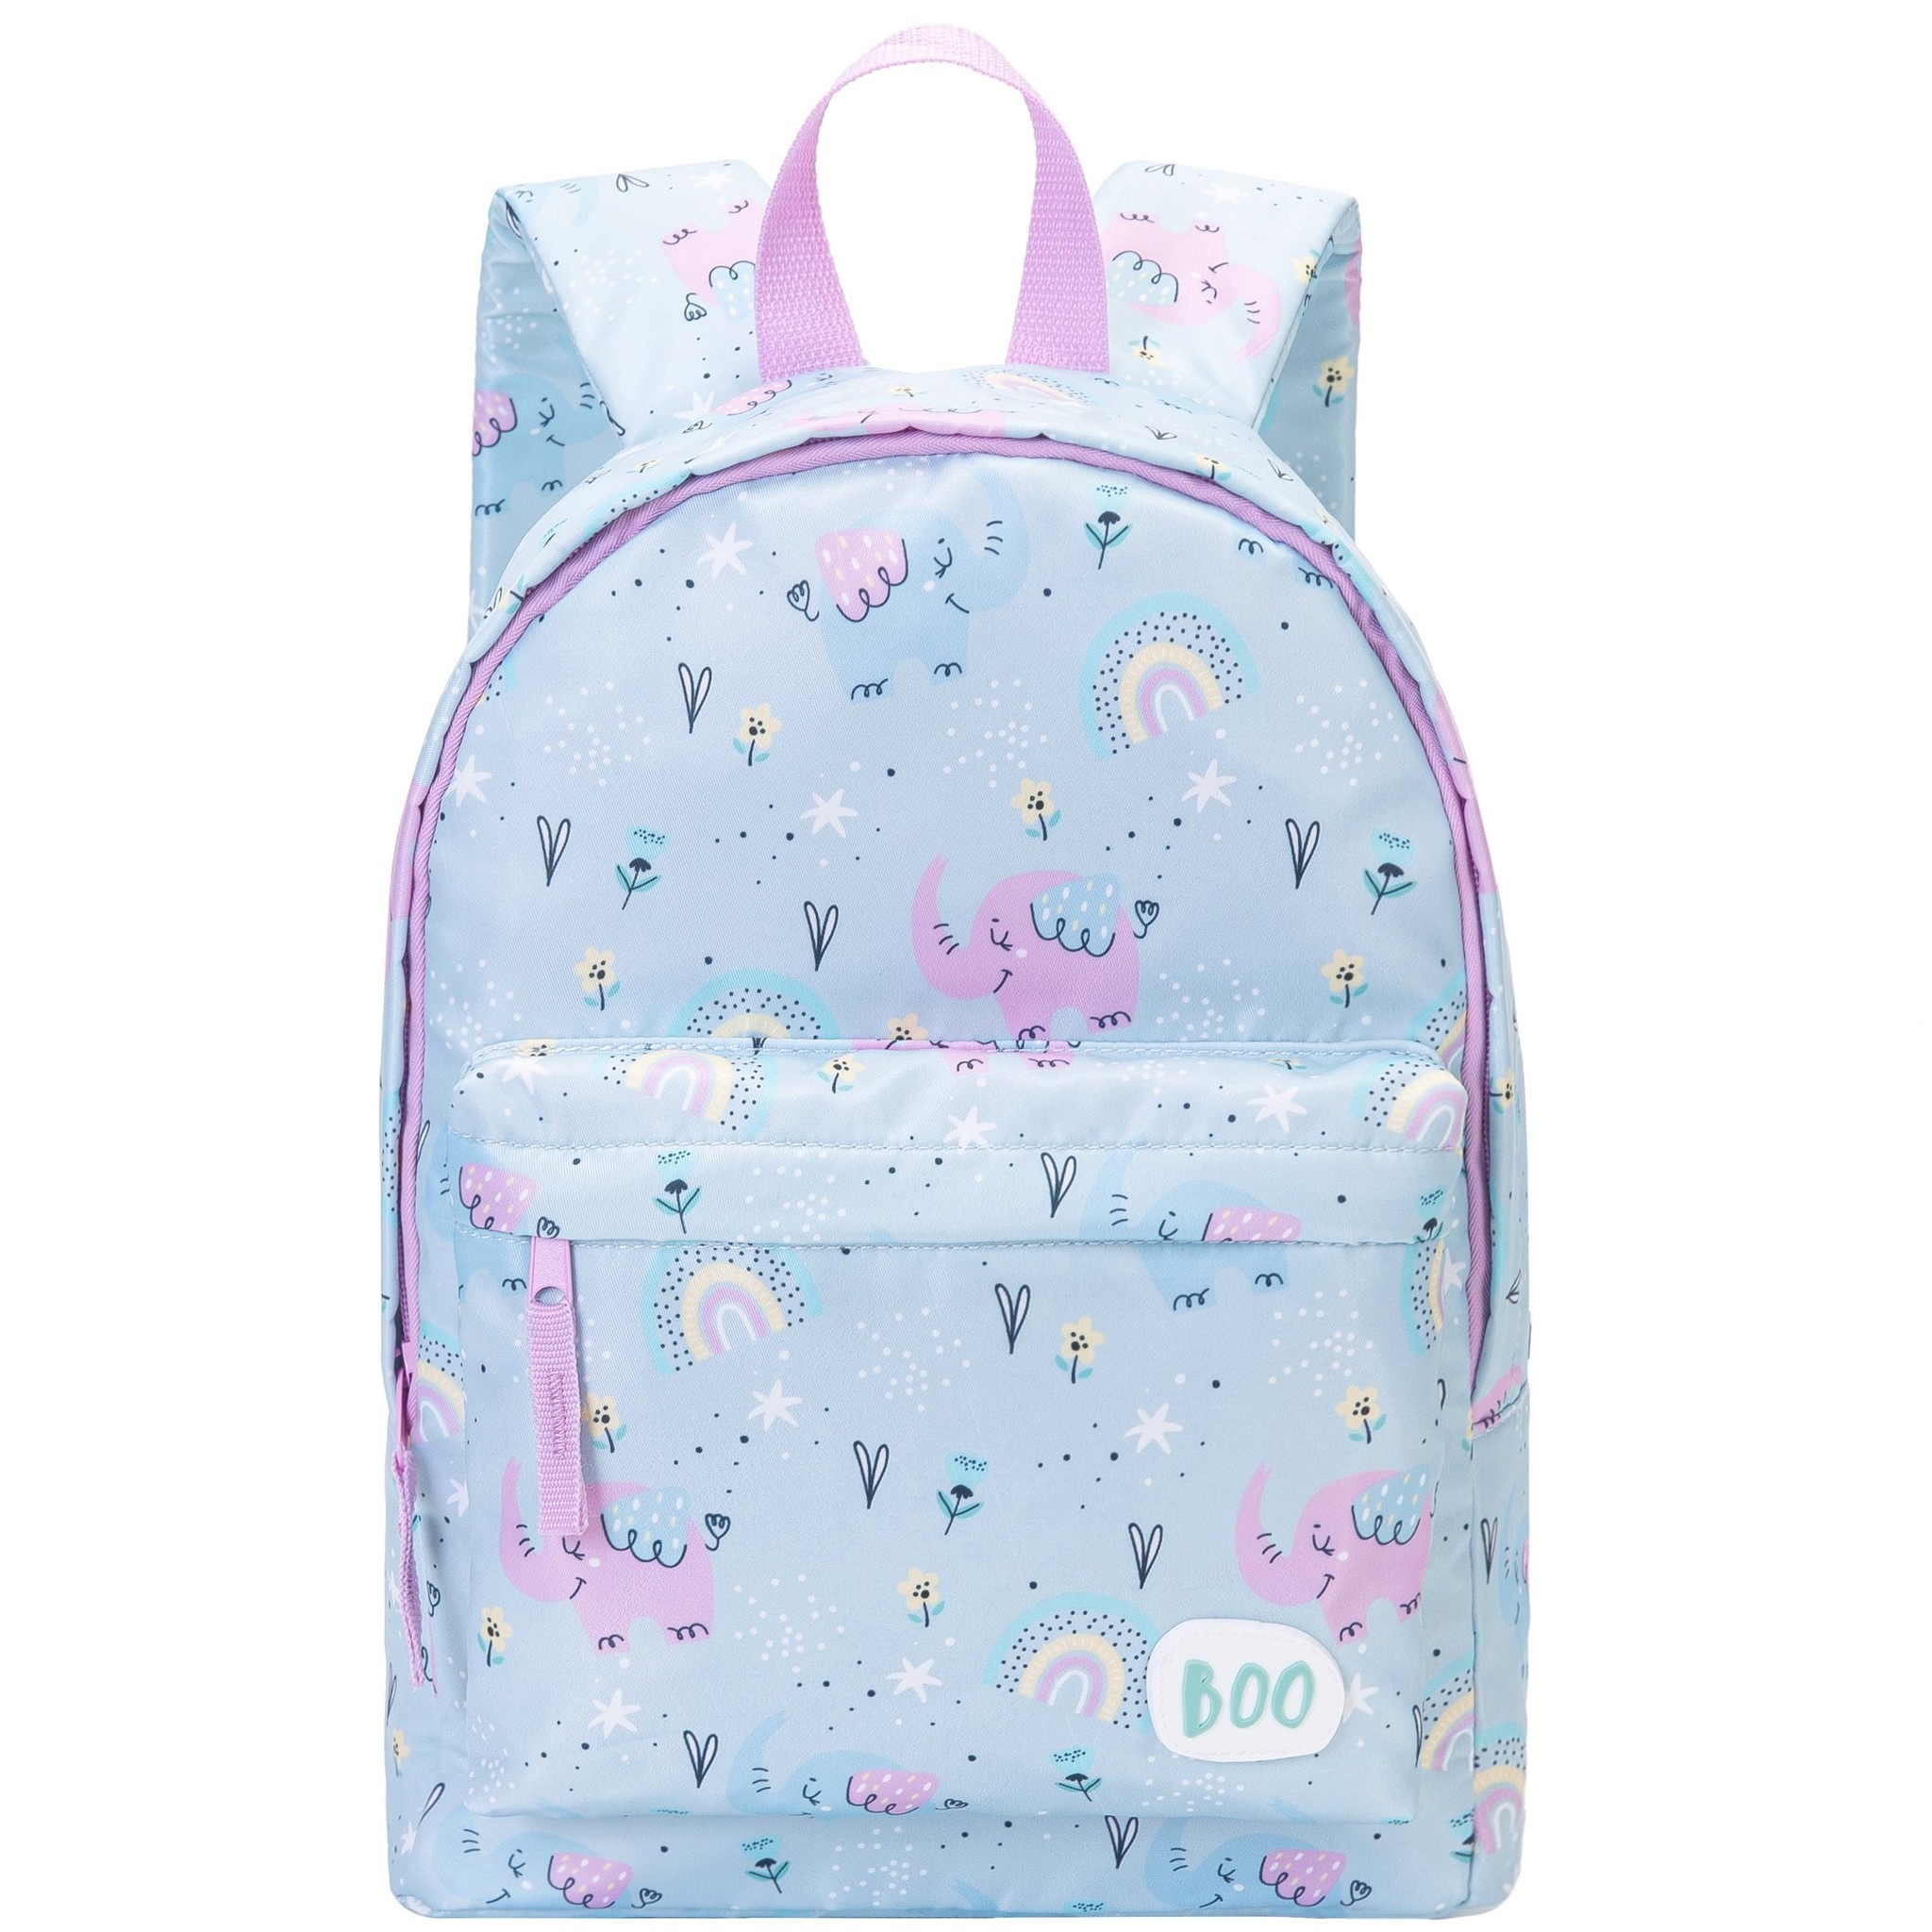 Boo Toddler Backpack, Wild & Cute - 32 x 24 x 11 cm - Polyester